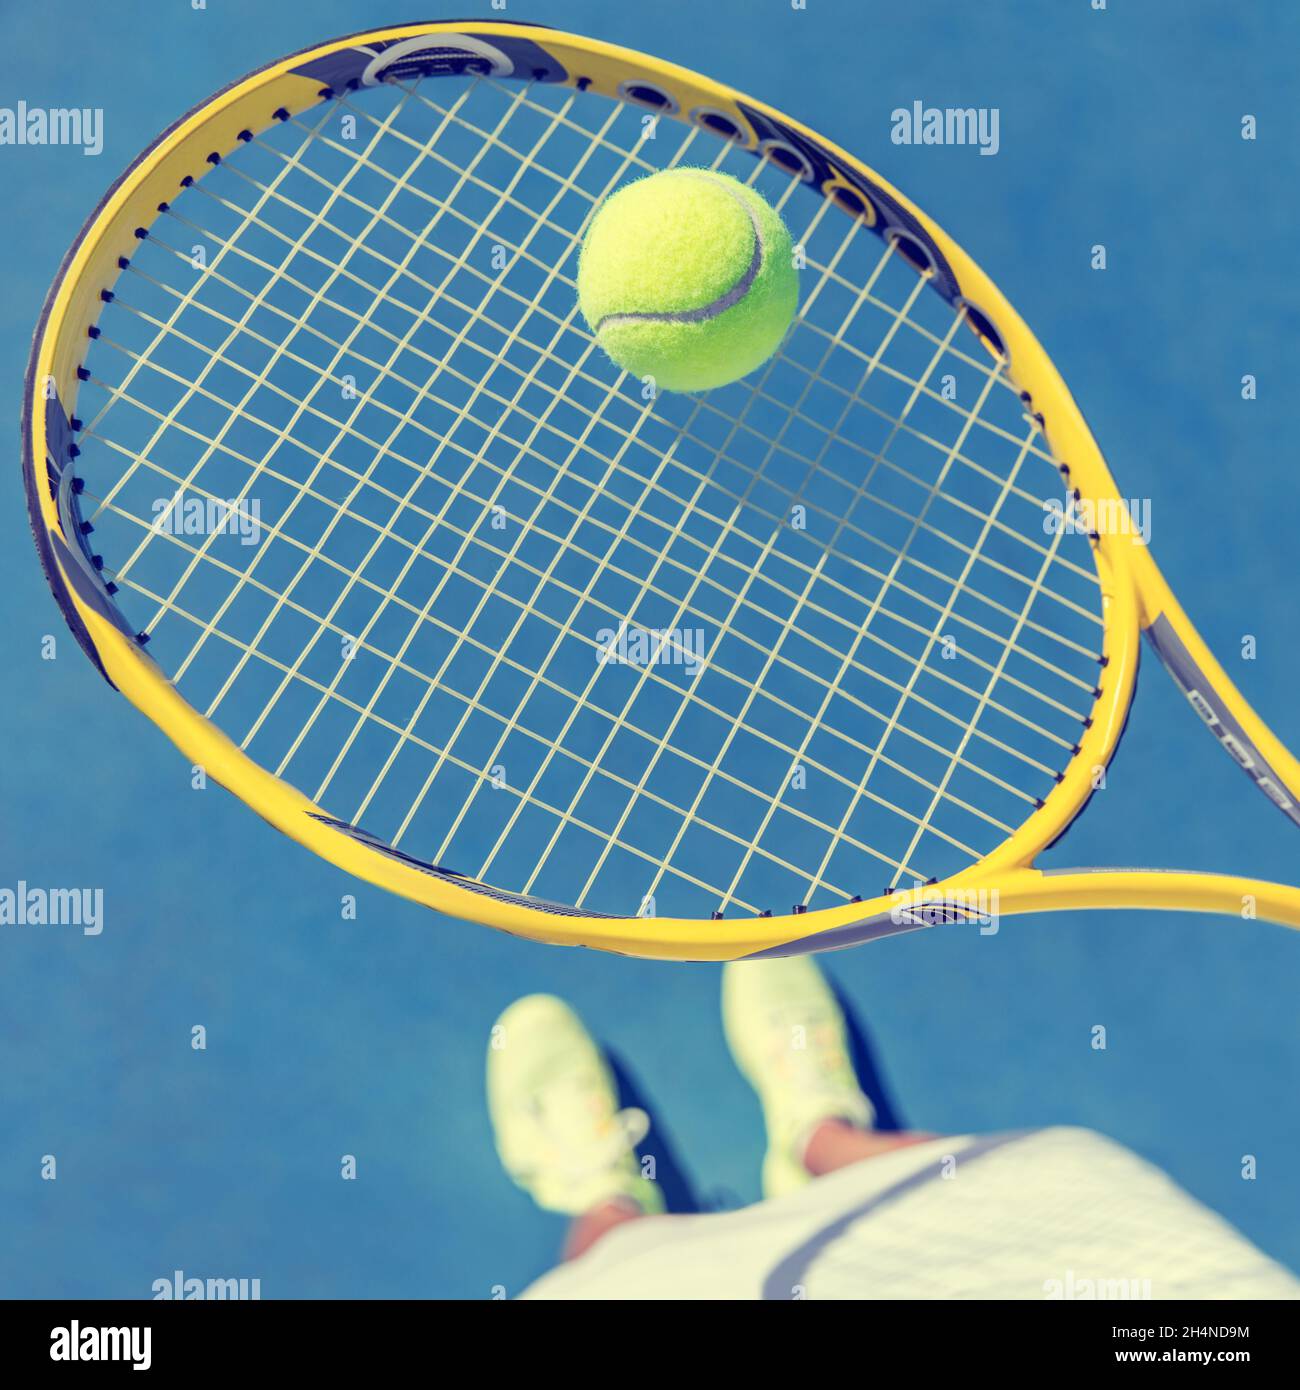 Tennis player girl taking pov selfie of racket and ball ready to play holding racket and showing shoes on blue outdoor tennis court. American hard Stock Photo